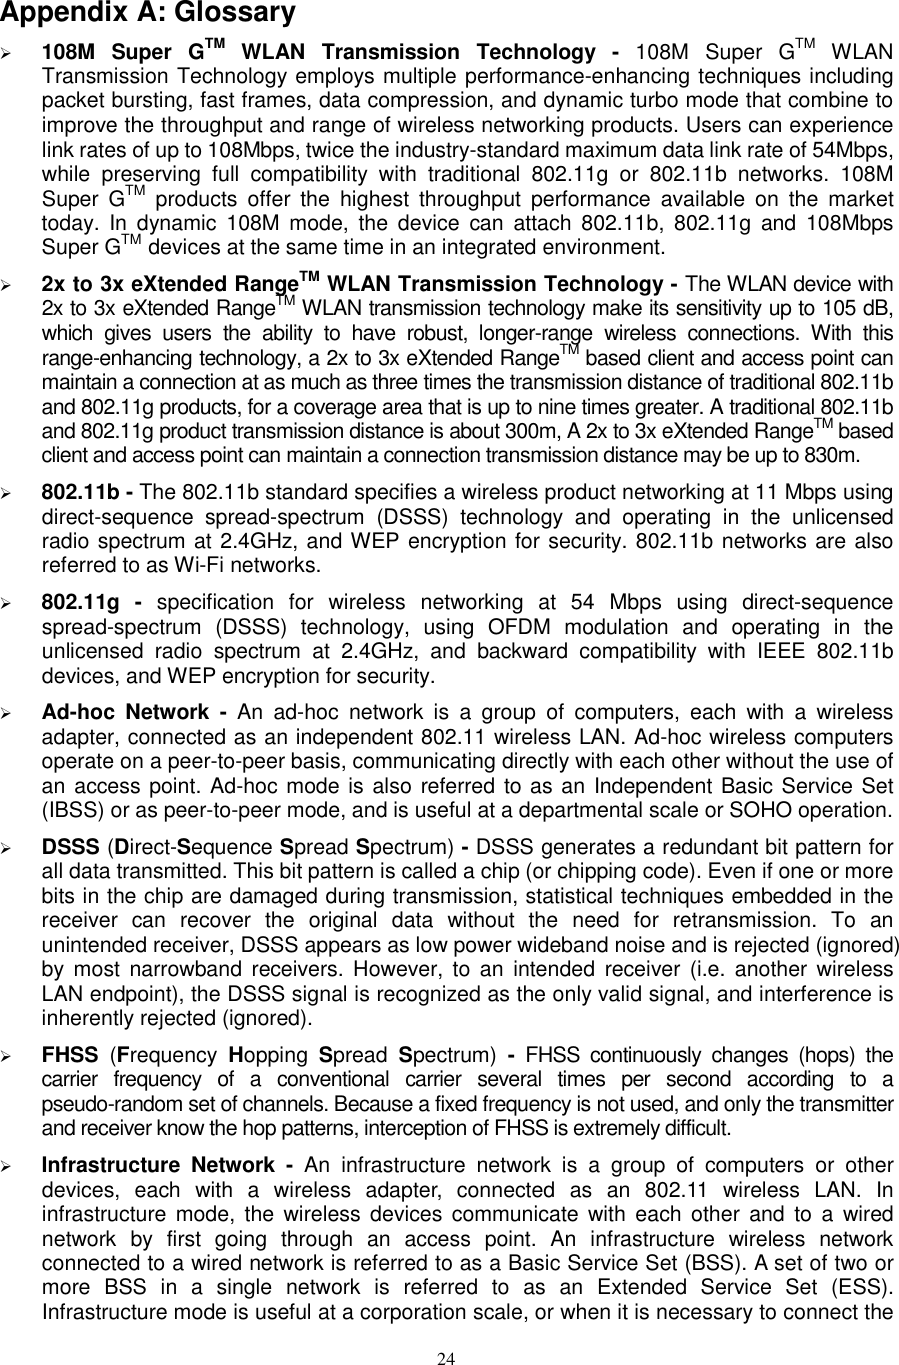  24 Appendix A: Glossary  108M  Super  GTM  WLAN  Transmission  Technology -  108M  Super  GTM  WLAN Transmission Technology employs multiple performance-enhancing techniques including packet bursting, fast frames, data compression, and dynamic turbo mode that combine to improve the throughput and range of wireless networking products. Users can experience link rates of up to 108Mbps, twice the industry-standard maximum data link rate of 54Mbps, while  preserving  full  compatibility  with  traditional  802.11g  or  802.11b  networks.  108M Super  GTM products  offer  the  highest  throughput  performance  available  on  the  market today.  In  dynamic  108M  mode,  the  device  can  attach  802.11b,  802.11g  and  108Mbps Super GTM devices at the same time in an integrated environment.  2x to 3x eXtended RangeTM WLAN Transmission Technology - The WLAN device with 2x to 3x eXtended RangeTM WLAN transmission technology make its sensitivity up to 105 dB, which  gives  users  the  ability  to  have  robust,  longer-range  wireless  connections.  With  this range-enhancing technology, a 2x to 3x eXtended RangeTM based client and access point can maintain a connection at as much as three times the transmission distance of traditional 802.11b and 802.11g products, for a coverage area that is up to nine times greater. A traditional 802.11b and 802.11g product transmission distance is about 300m, A 2x to 3x eXtended RangeTM based client and access point can maintain a connection transmission distance may be up to 830m.  802.11b - The 802.11b standard specifies a wireless product networking at 11 Mbps using direct-sequence  spread-spectrum  (DSSS)  technology  and  operating  in  the  unlicensed radio spectrum at 2.4GHz, and WEP encryption for security. 802.11b networks are also referred to as Wi-Fi networks.  802.11g  -  specification  for  wireless  networking  at  54  Mbps  using  direct-sequence spread-spectrum  (DSSS)  technology,  using  OFDM  modulation  and  operating  in  the unlicensed  radio  spectrum  at  2.4GHz,  and  backward  compatibility  with  IEEE  802.11b devices, and WEP encryption for security.  Ad-hoc  Network  -  An  ad-hoc  network  is  a  group  of  computers,  each  with  a  wireless adapter, connected as an independent 802.11 wireless LAN. Ad-hoc wireless computers operate on a peer-to-peer basis, communicating directly with each other without the use of an access point. Ad-hoc mode is also referred to as an Independent Basic Service Set (IBSS) or as peer-to-peer mode, and is useful at a departmental scale or SOHO operation.    DSSS (Direct-Sequence Spread Spectrum) - DSSS generates a redundant bit pattern for all data transmitted. This bit pattern is called a chip (or chipping code). Even if one or more bits in the chip are damaged during transmission, statistical techniques embedded in the receiver  can  recover  the  original  data  without  the  need  for  retransmission.  To  an unintended receiver, DSSS appears as low power wideband noise and is rejected (ignored) by  most narrowband  receivers. However,  to an  intended  receiver  (i.e. another  wireless LAN endpoint), the DSSS signal is recognized as the only valid signal, and interference is inherently rejected (ignored).  FHSS  (Frequency  Hopping  Spread  Spectrum)  -  FHSS  continuously  changes  (hops)  the carrier  frequency  of  a  conventional  carrier  several  times  per  second  according  to  a pseudo-random set of channels. Because a fixed frequency is not used, and only the transmitter and receiver know the hop patterns, interception of FHSS is extremely difficult.  Infrastructure  Network  -  An  infrastructure  network  is  a  group  of  computers  or  other devices,  each  with  a  wireless  adapter,  connected  as  an  802.11  wireless  LAN.  In infrastructure mode,  the wireless  devices  communicate  with each  other and  to a  wired network  by  first  going  through  an  access  point.  An  infrastructure  wireless  network connected to a wired network is referred to as a Basic Service Set (BSS). A set of two or more  BSS  in  a  single  network  is  referred  to  as  an  Extended  Service  Set  (ESS). Infrastructure mode is useful at a corporation scale, or when it is necessary to connect the 